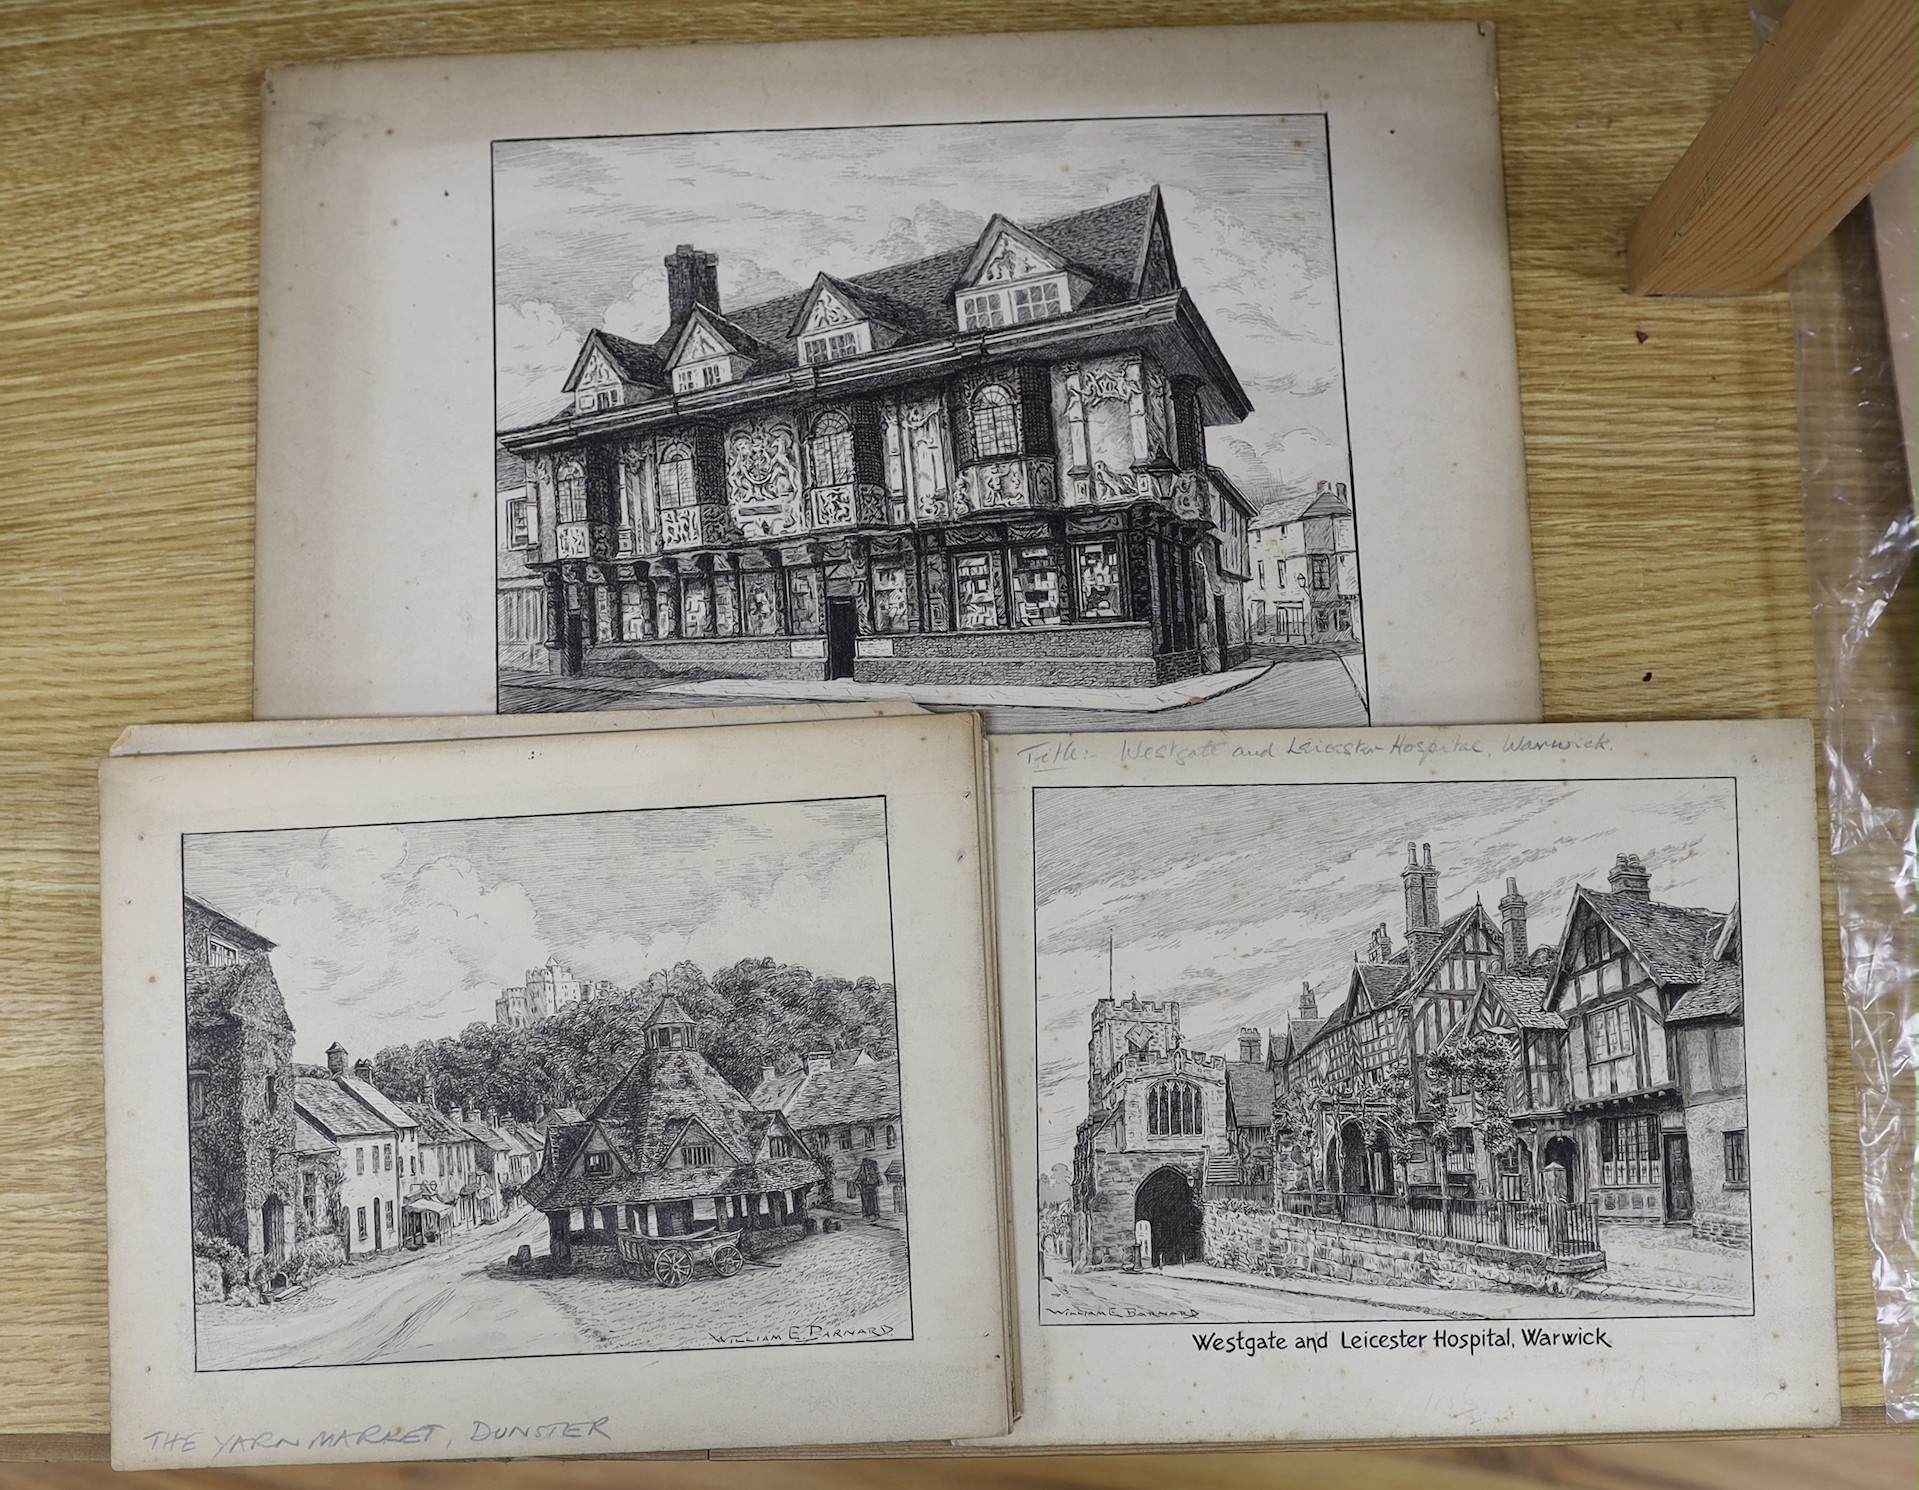 William E. Barnard, eight pen and ink drawings, Views of English towns - Clovelly, Evesham, Ipswich, Warwick, Chichester, Arundel, Canterbury and Dunster, signed, largest 19 x 26cm, unframed